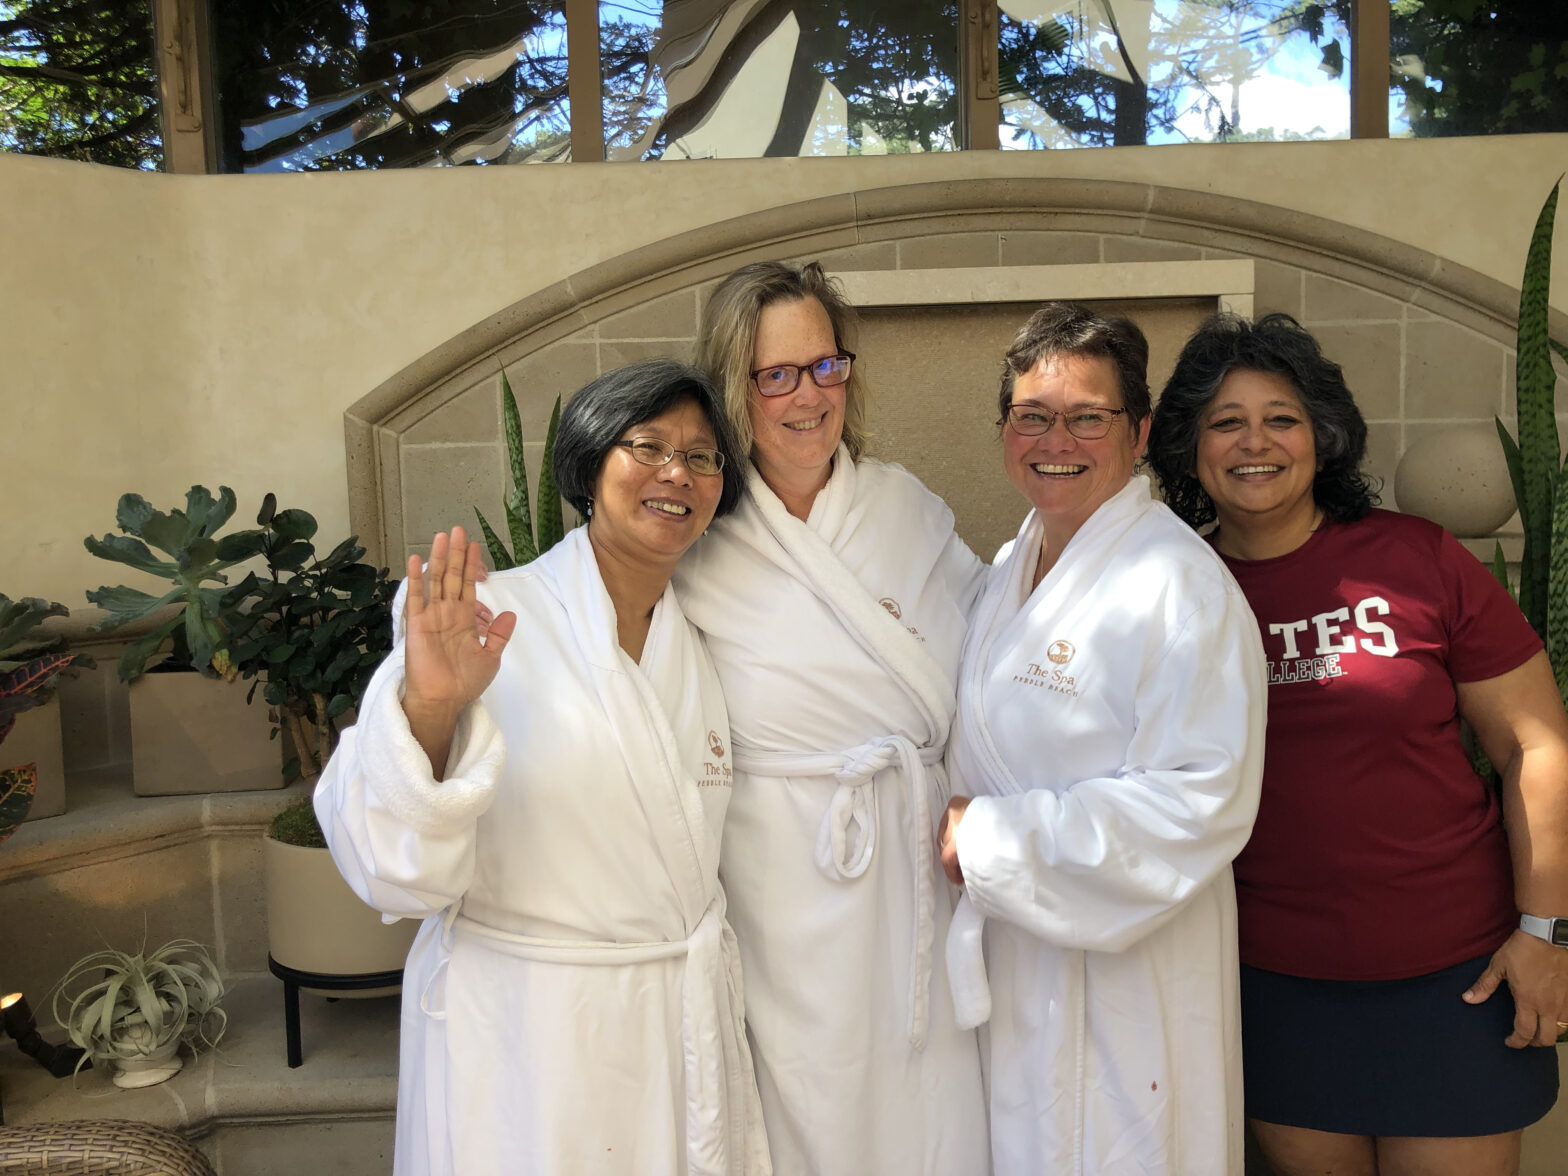 four women, three of them in white bathrobes, stand together smiling